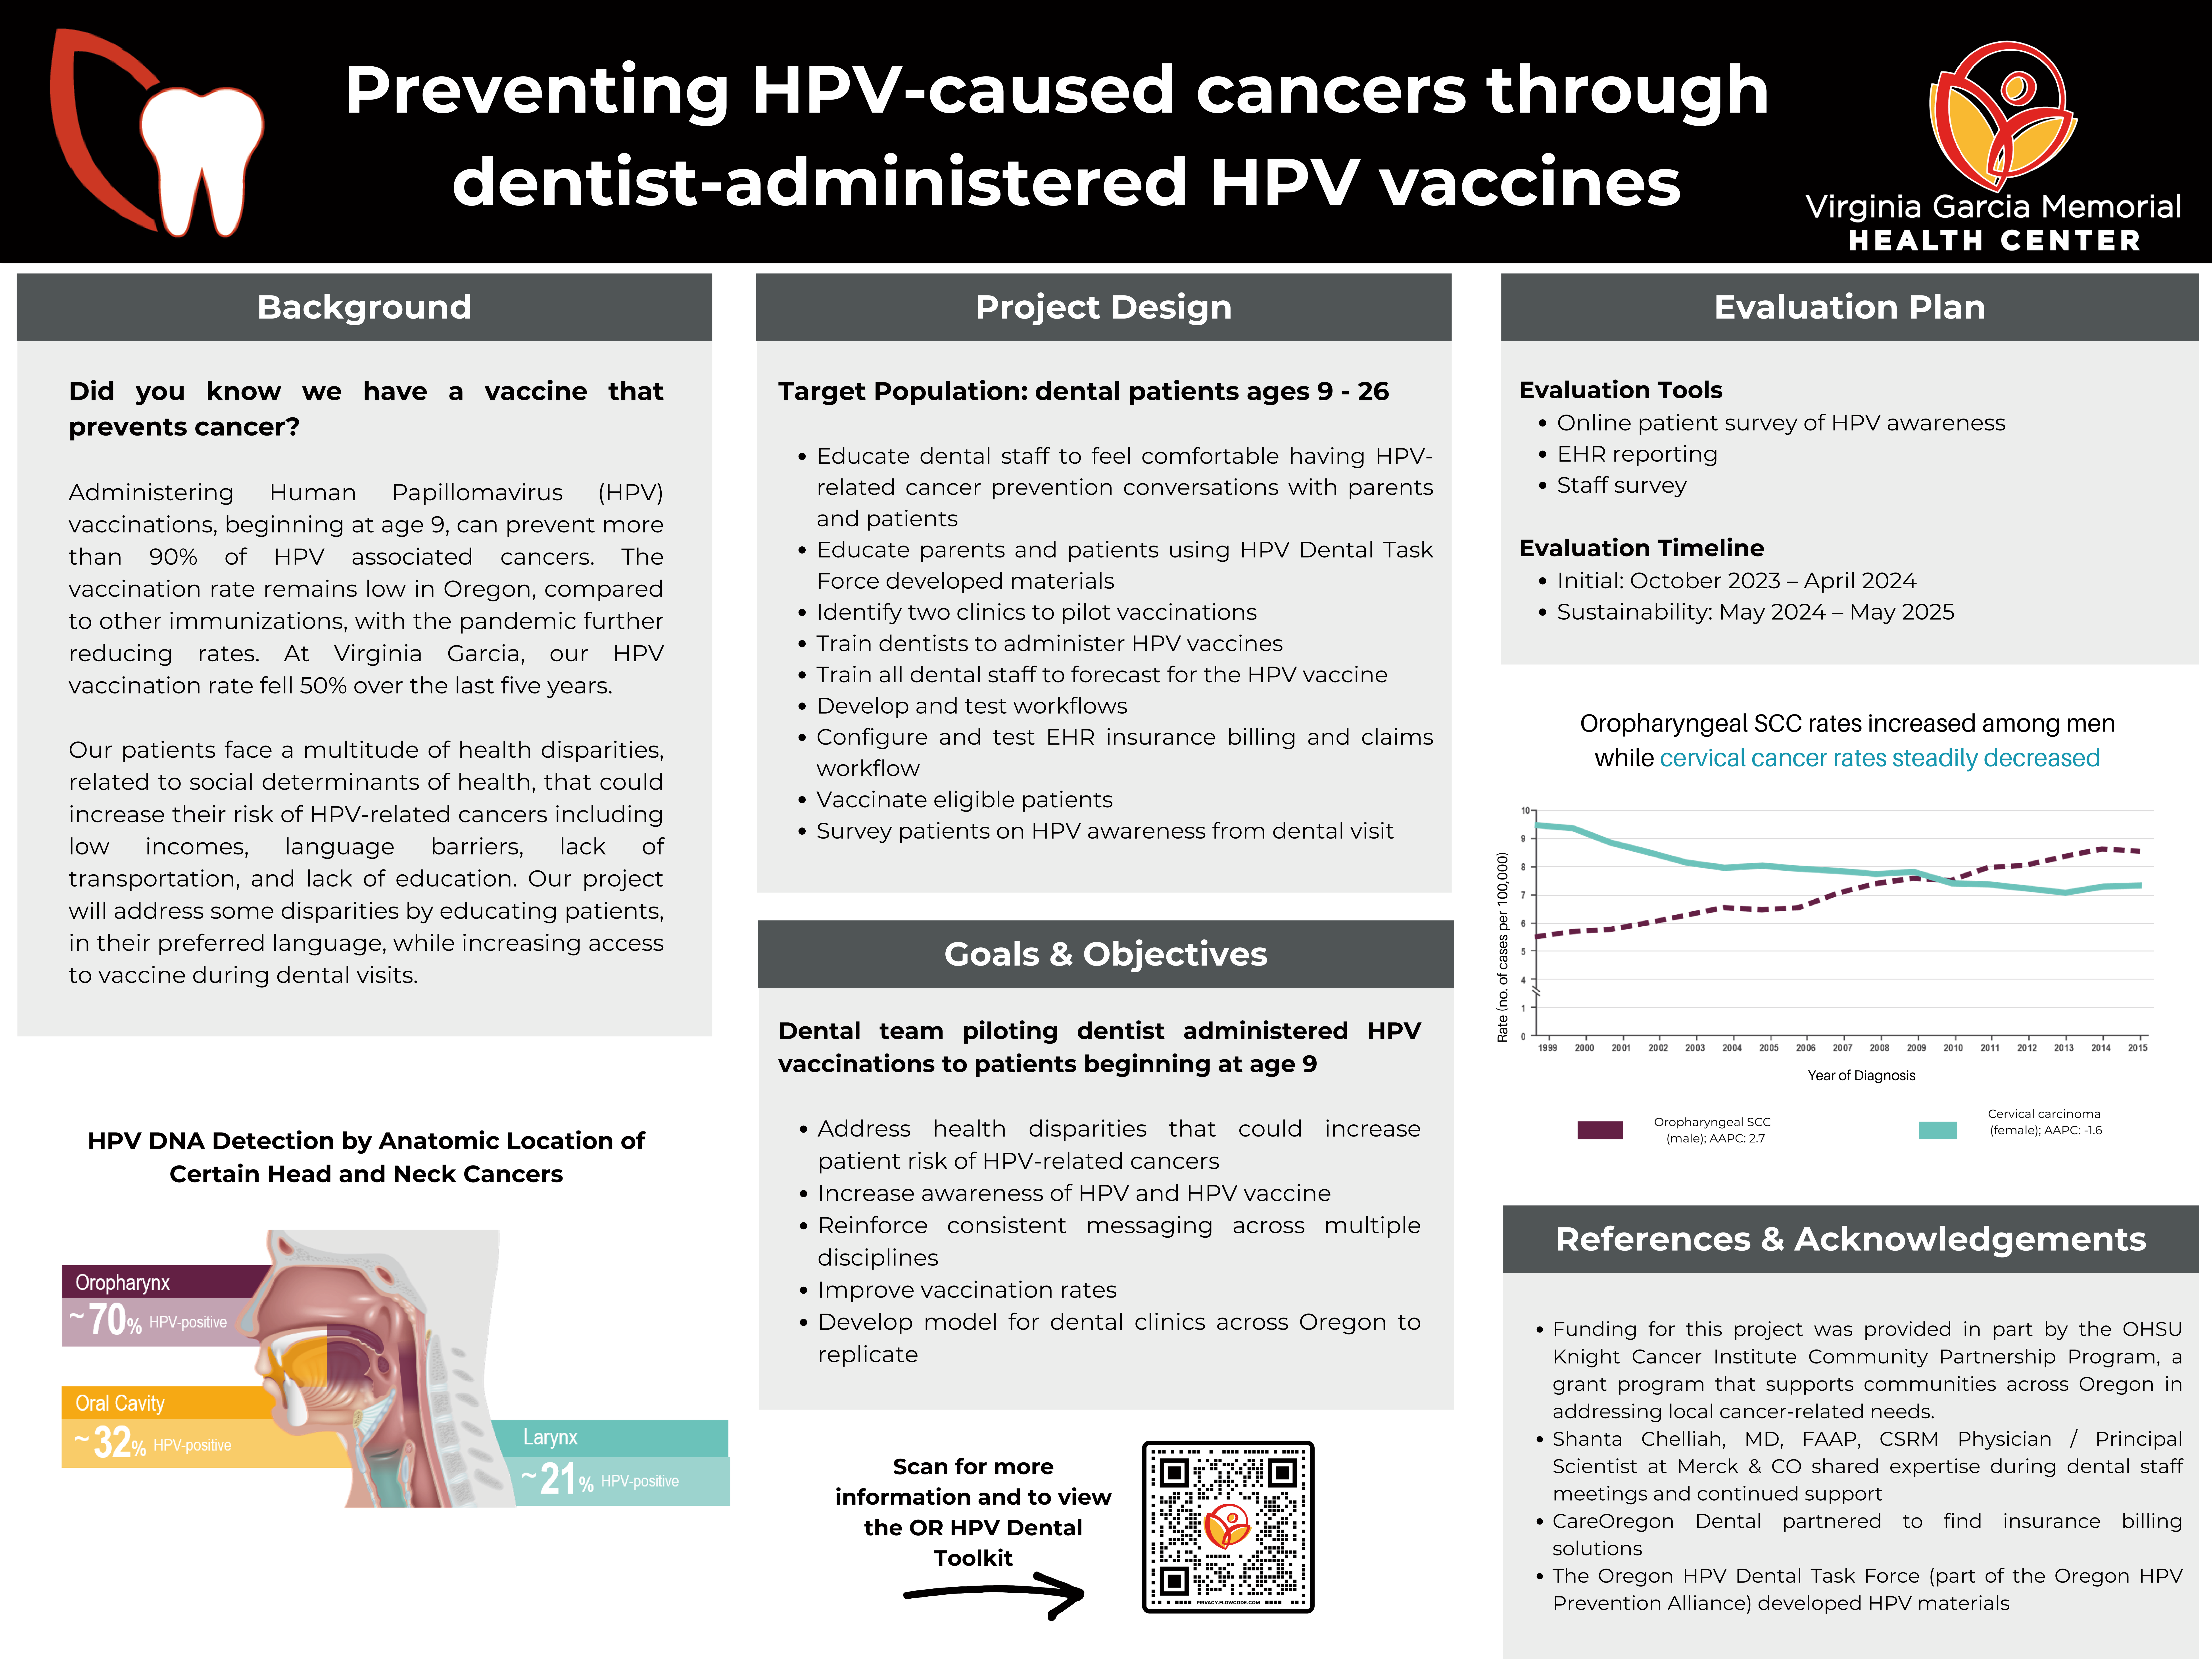 Preventing HPV-Caused Cancers Through Dentist-Administered HPV Vaccines - Virginia Garcia